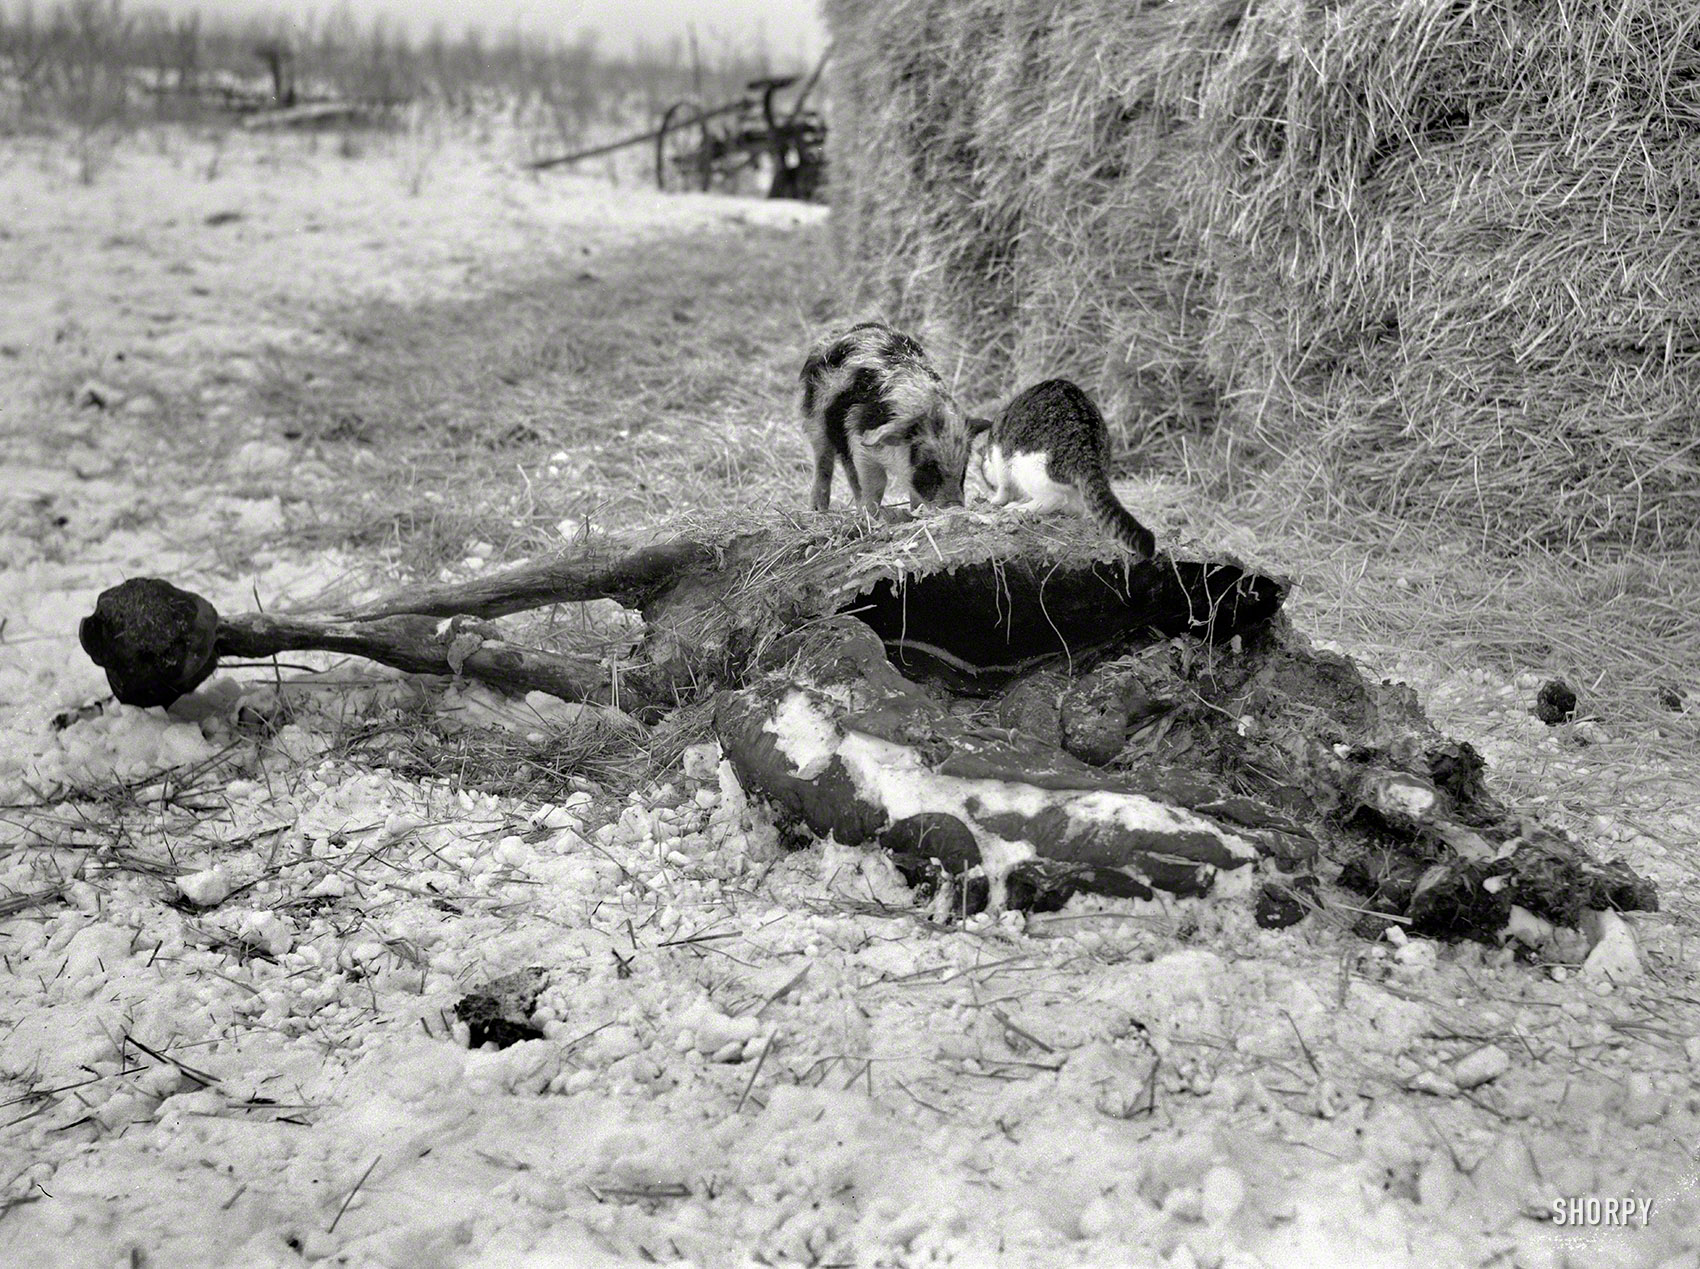 December 1936. "William Helmke farm near Dickens, Iowa." Kittycat and Piglet sharing a Mulesicle. Photo by Russell Lee. View full size.